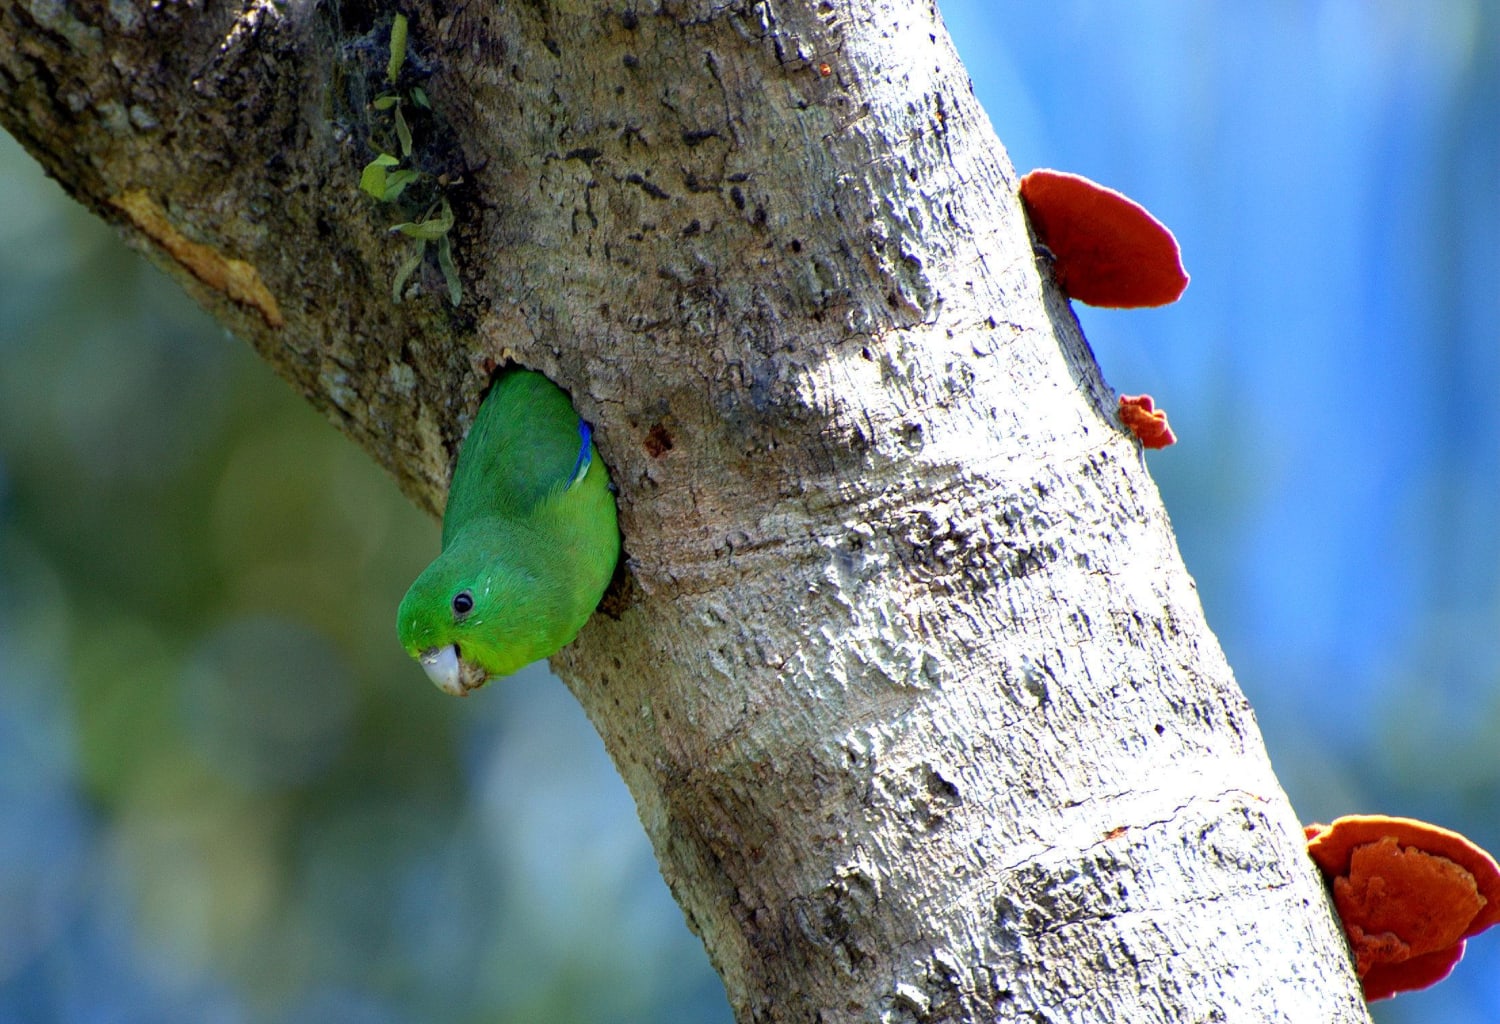 Pacific parrotlet, it's maybe the smallest parrot in the world, (height: 12 cm - 15 cm, weight around 30 grams), The Pacific parrotlet is found in Central America and South America. They are most prevalent in Peru and Ecuador.